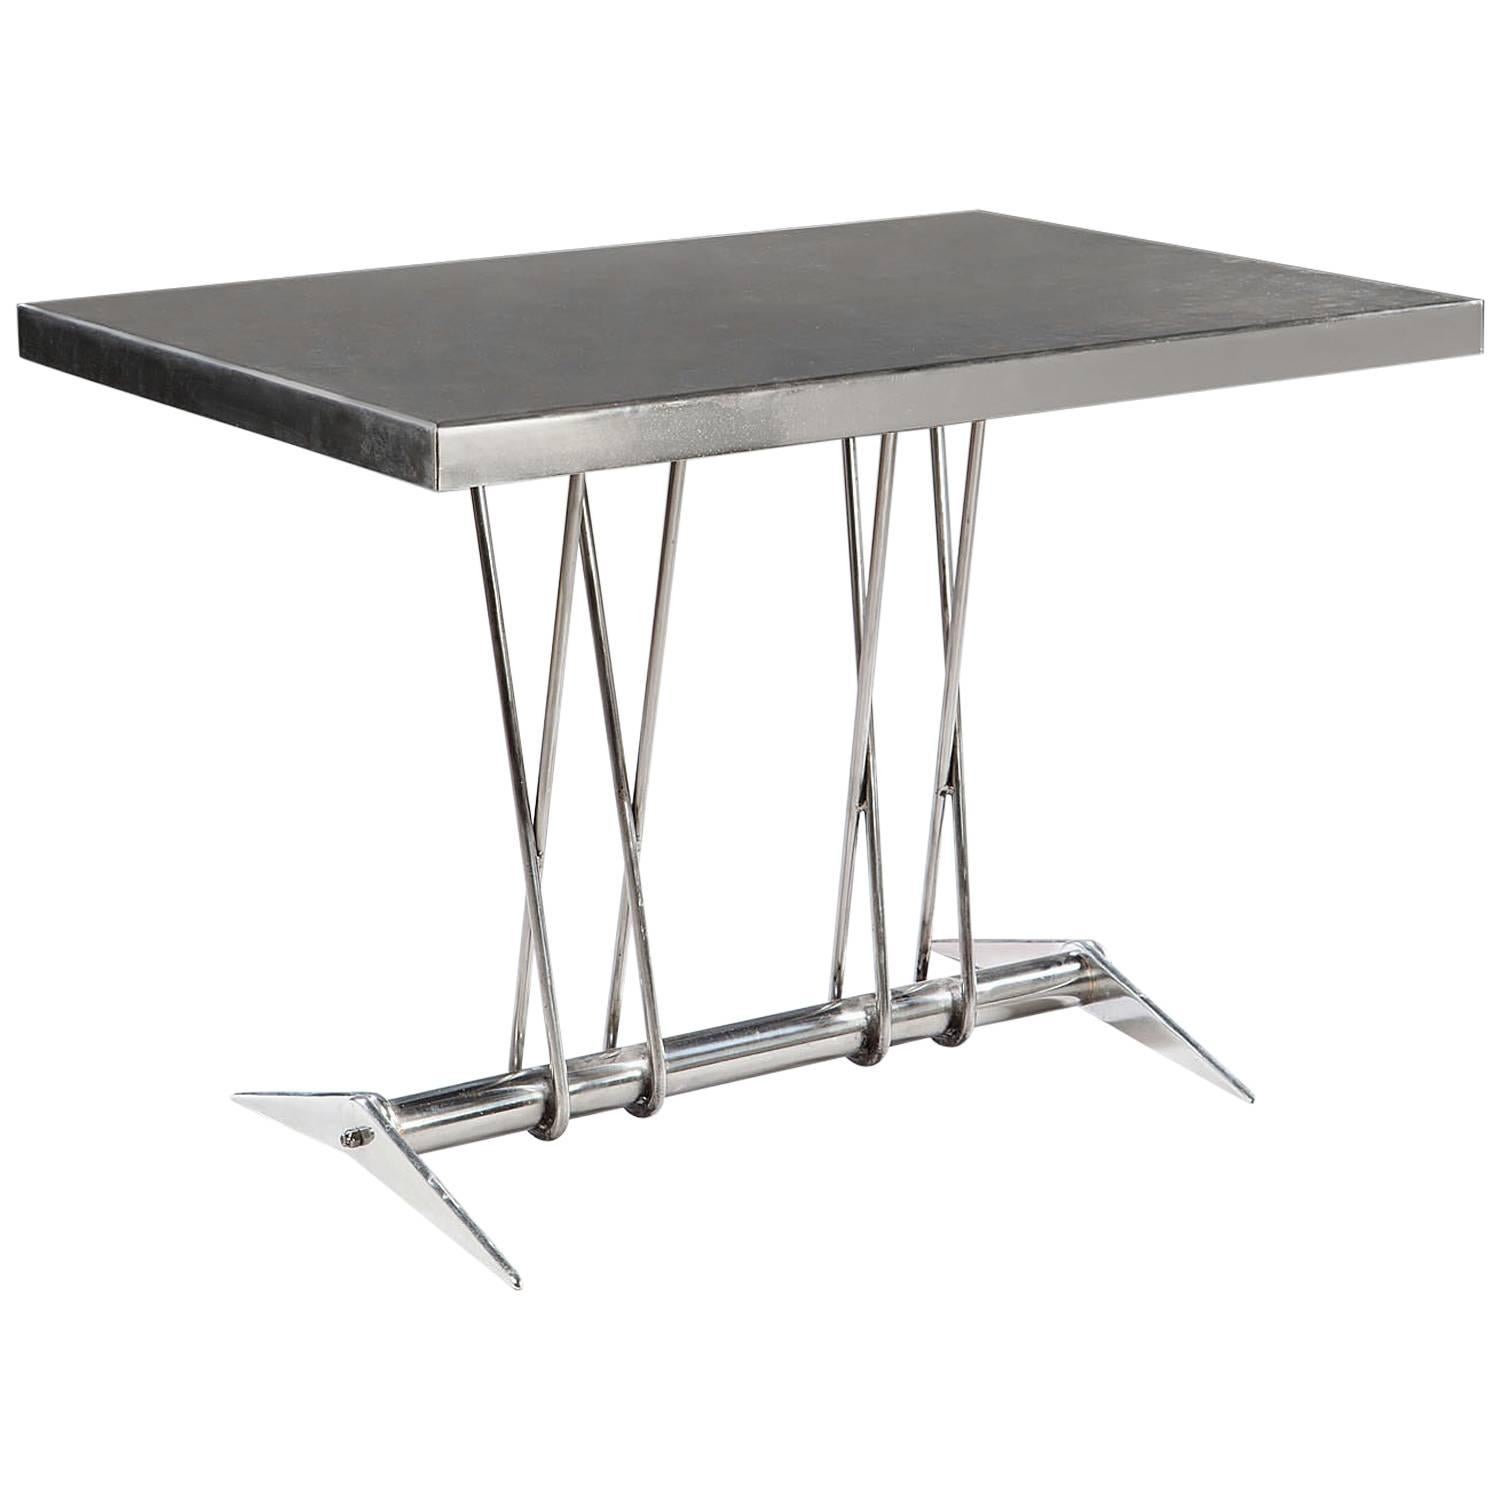 French Modernist Polished Steel Centre Table